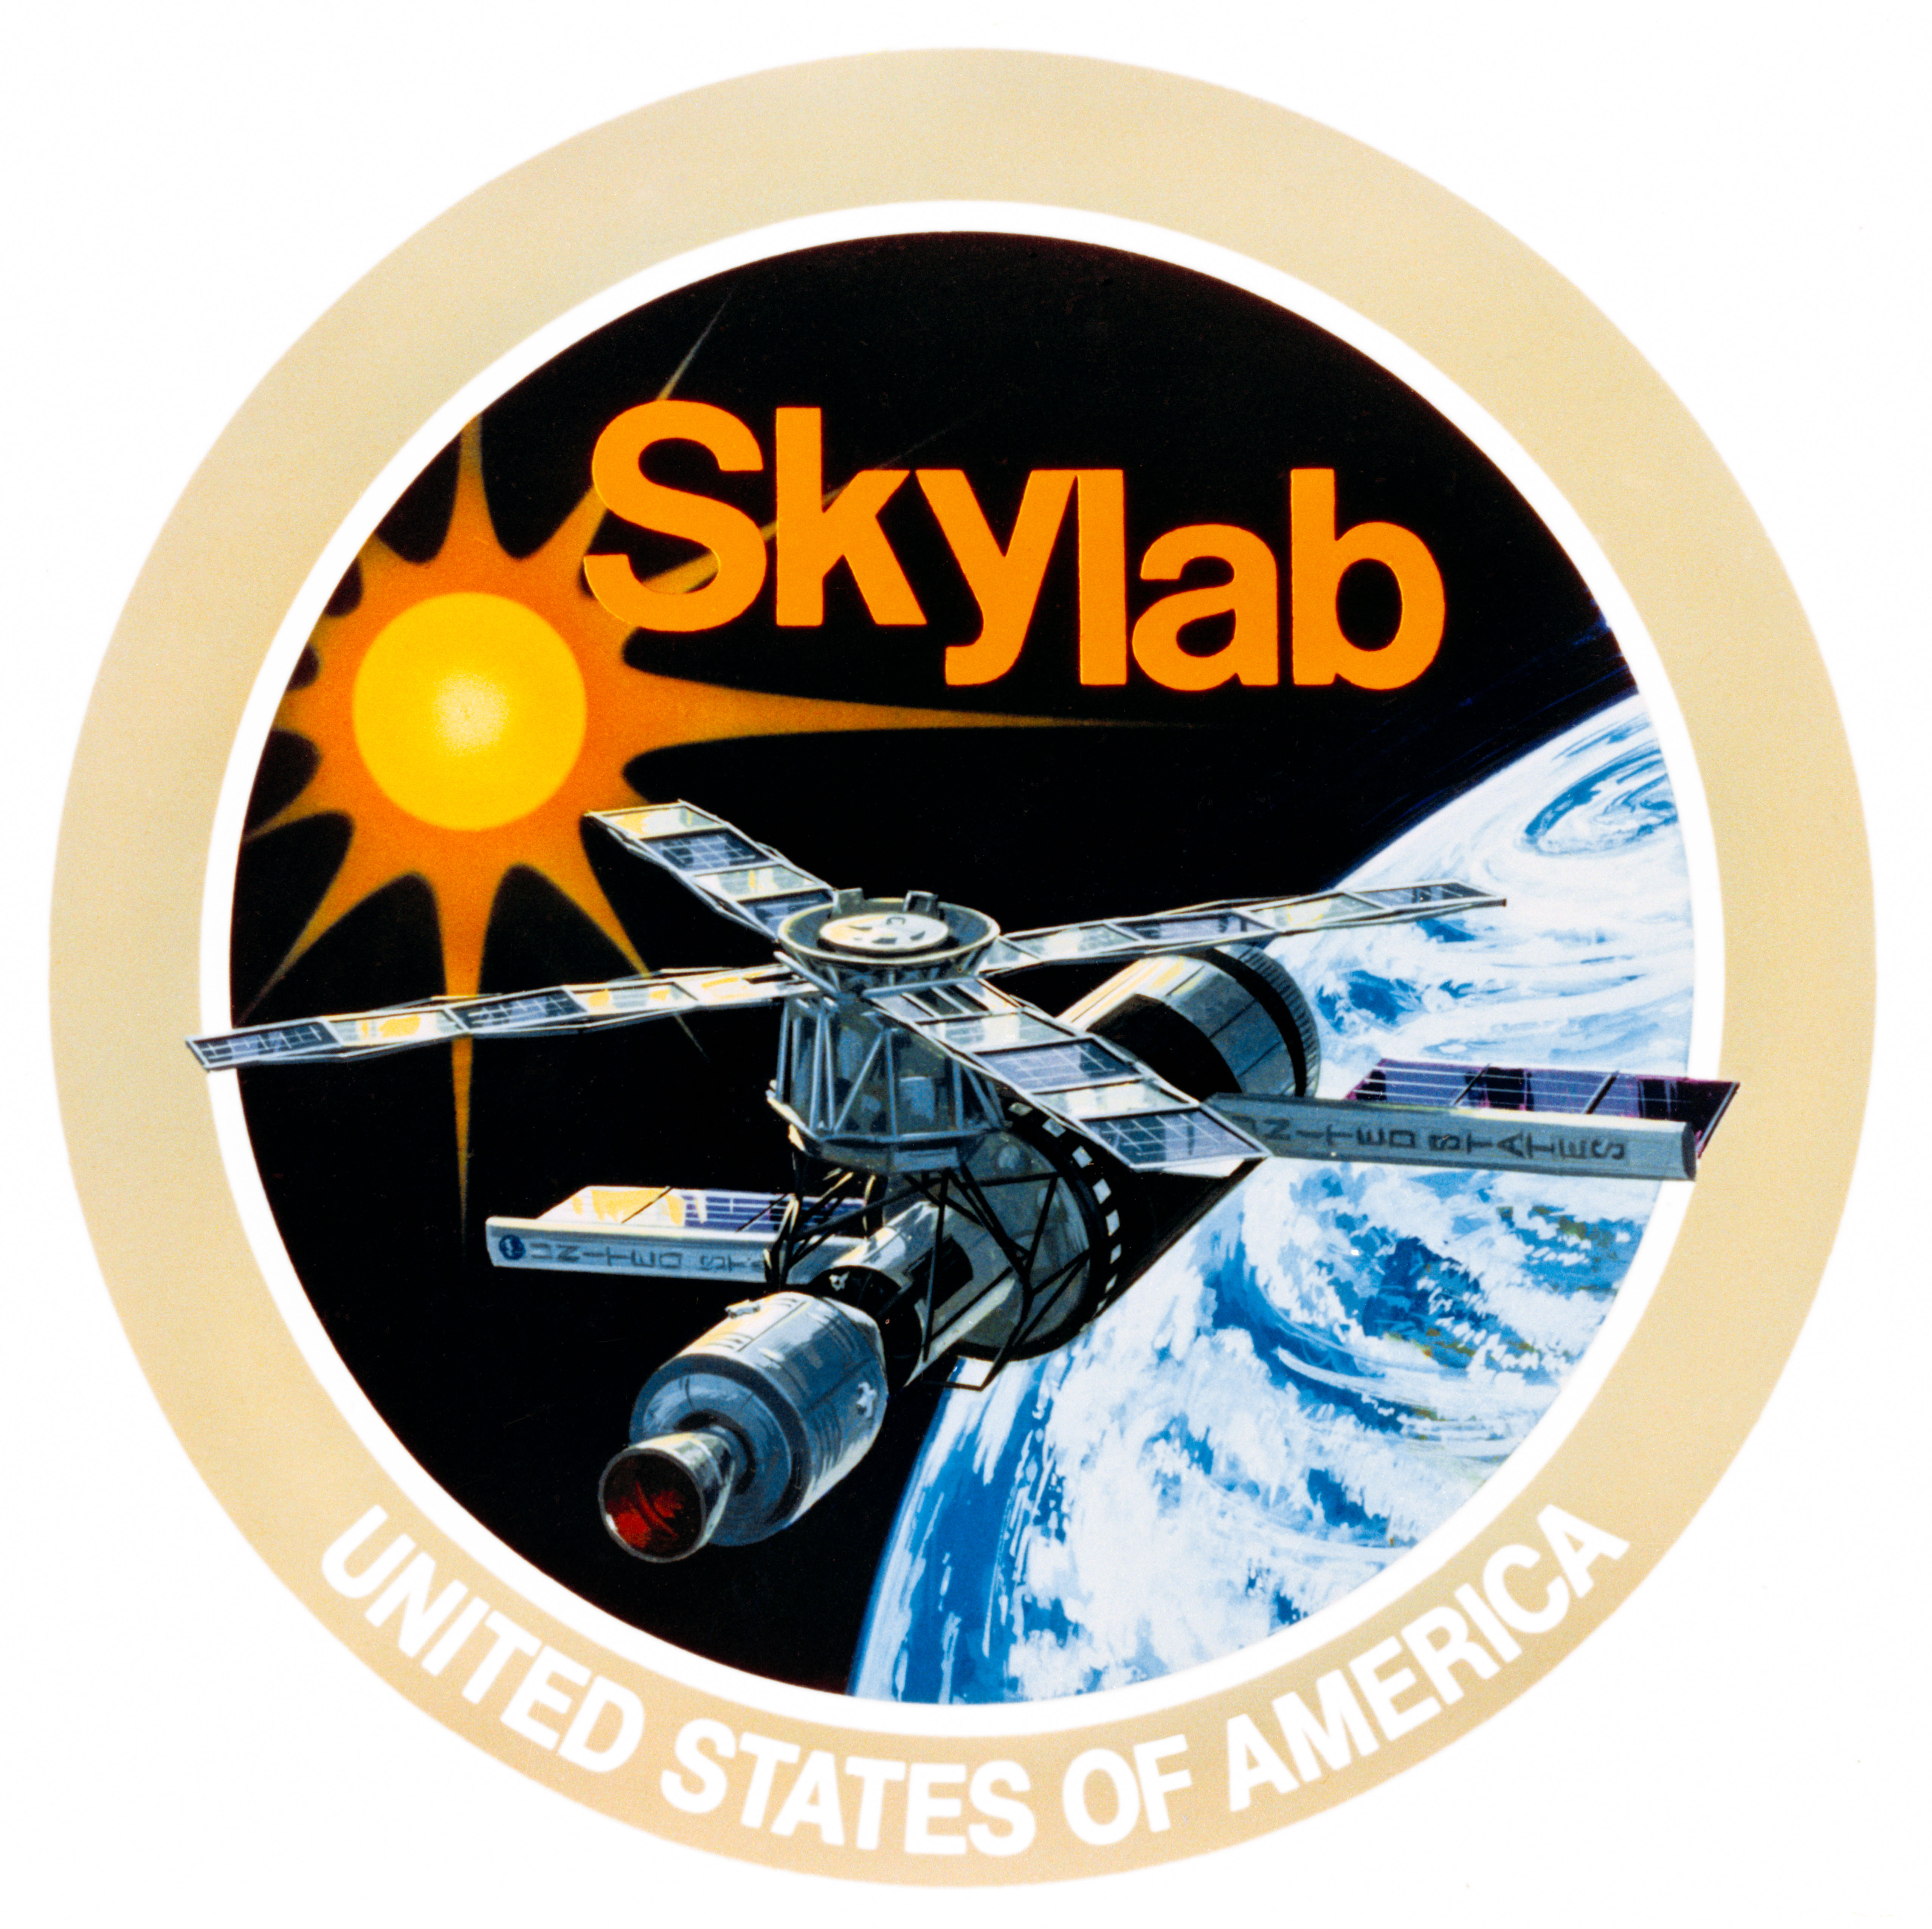 Skylab program official emblem with image of Skylab and Earth and sun in background